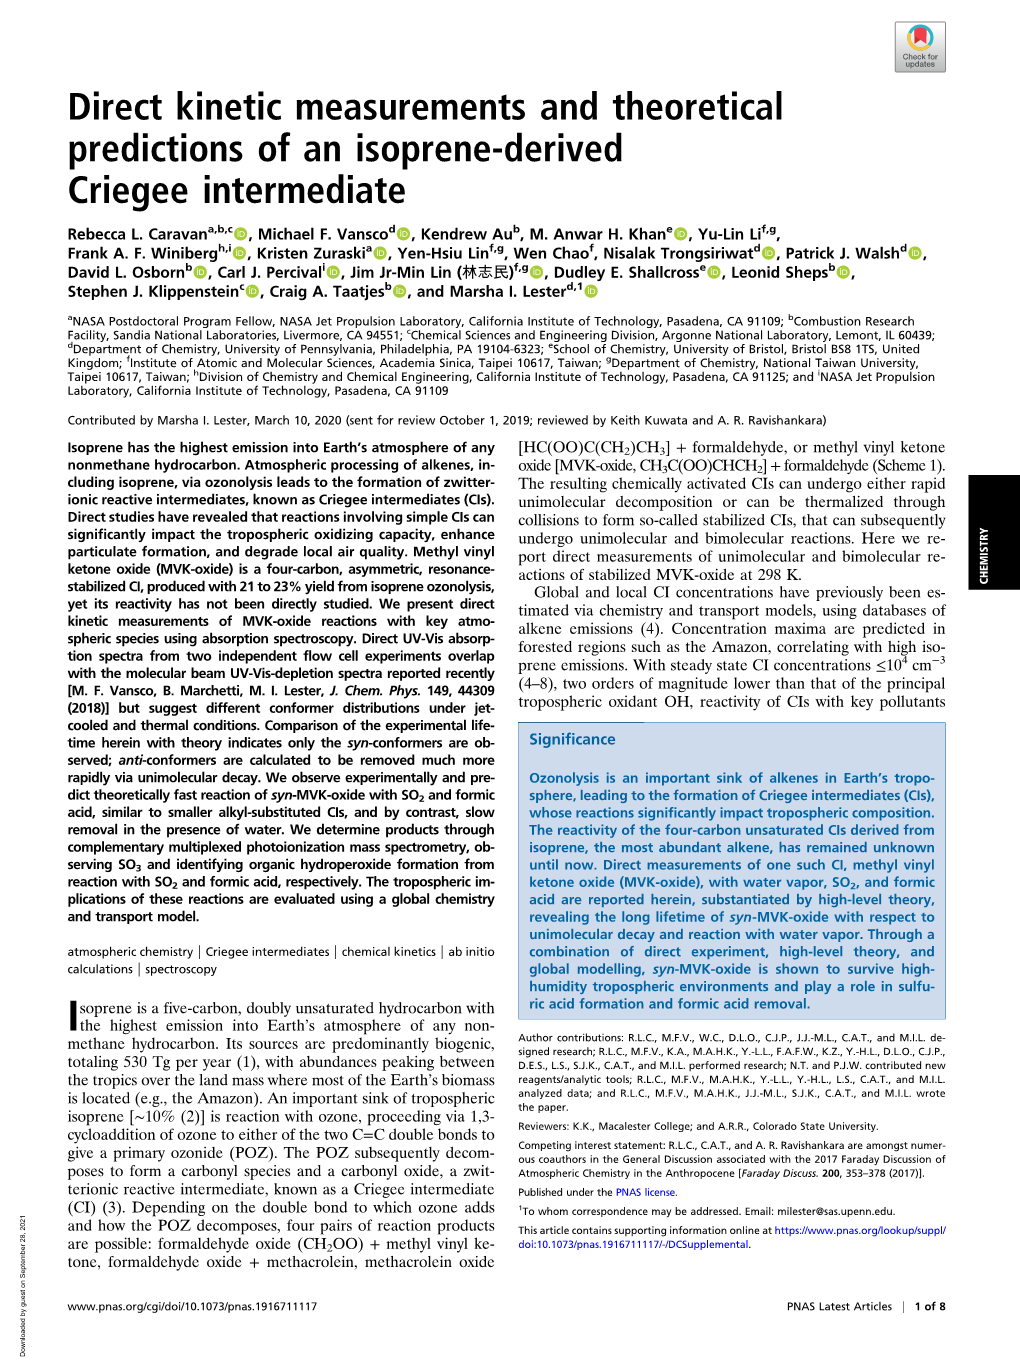 Direct Kinetic Measurements and Theoretical Predictions of an Isoprene-Derived Criegee Intermediate